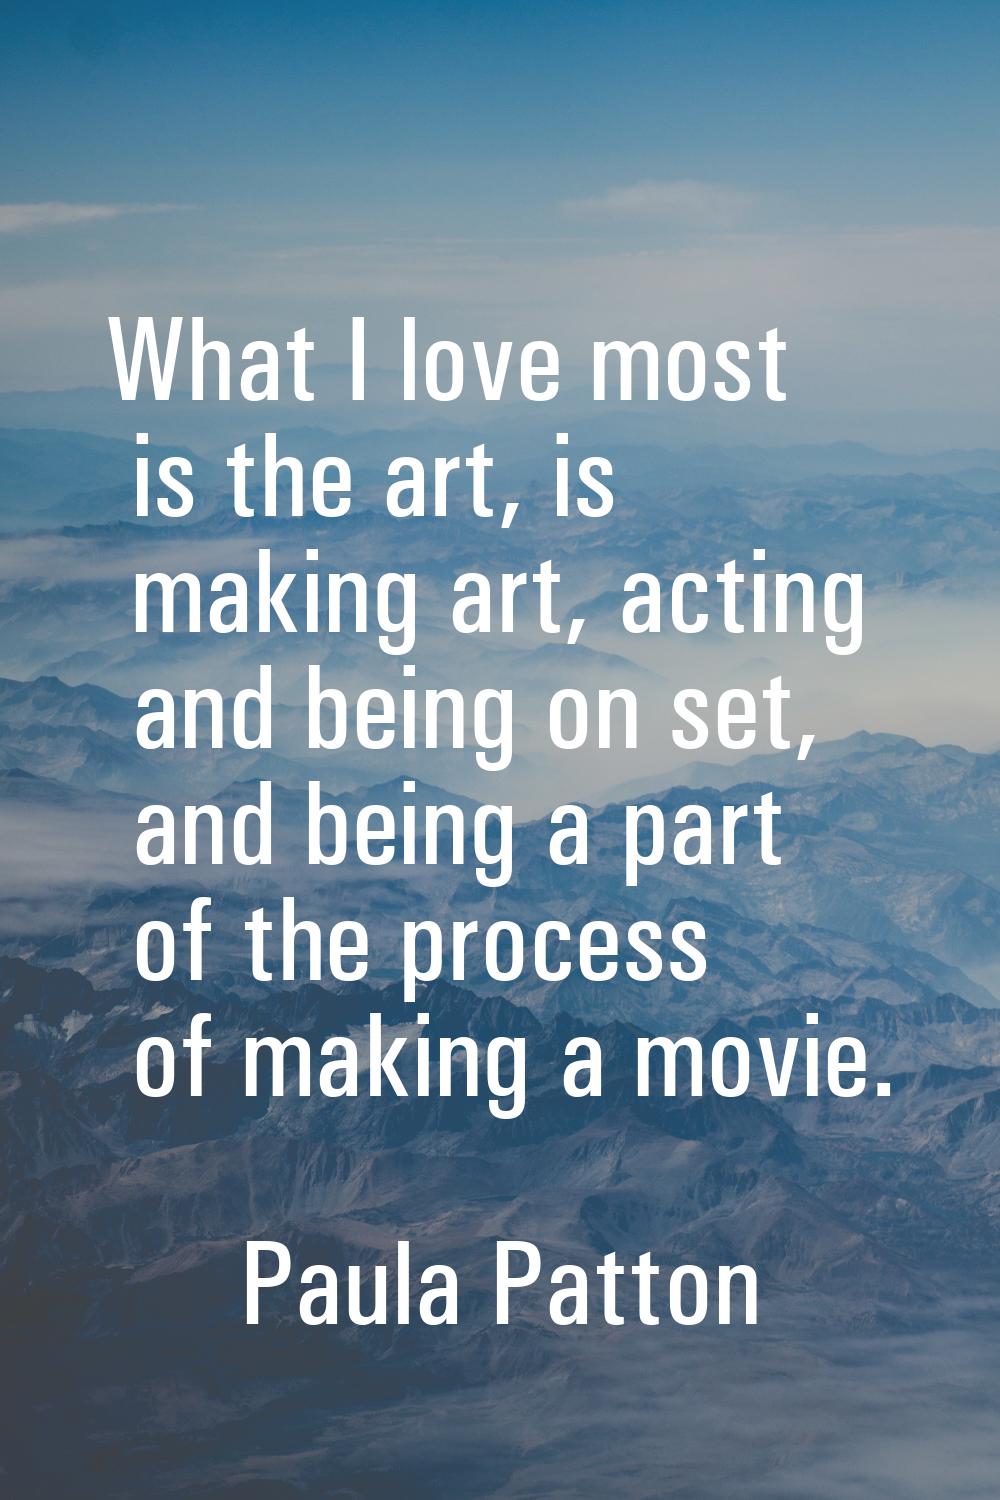 What I love most is the art, is making art, acting and being on set, and being a part of the proces